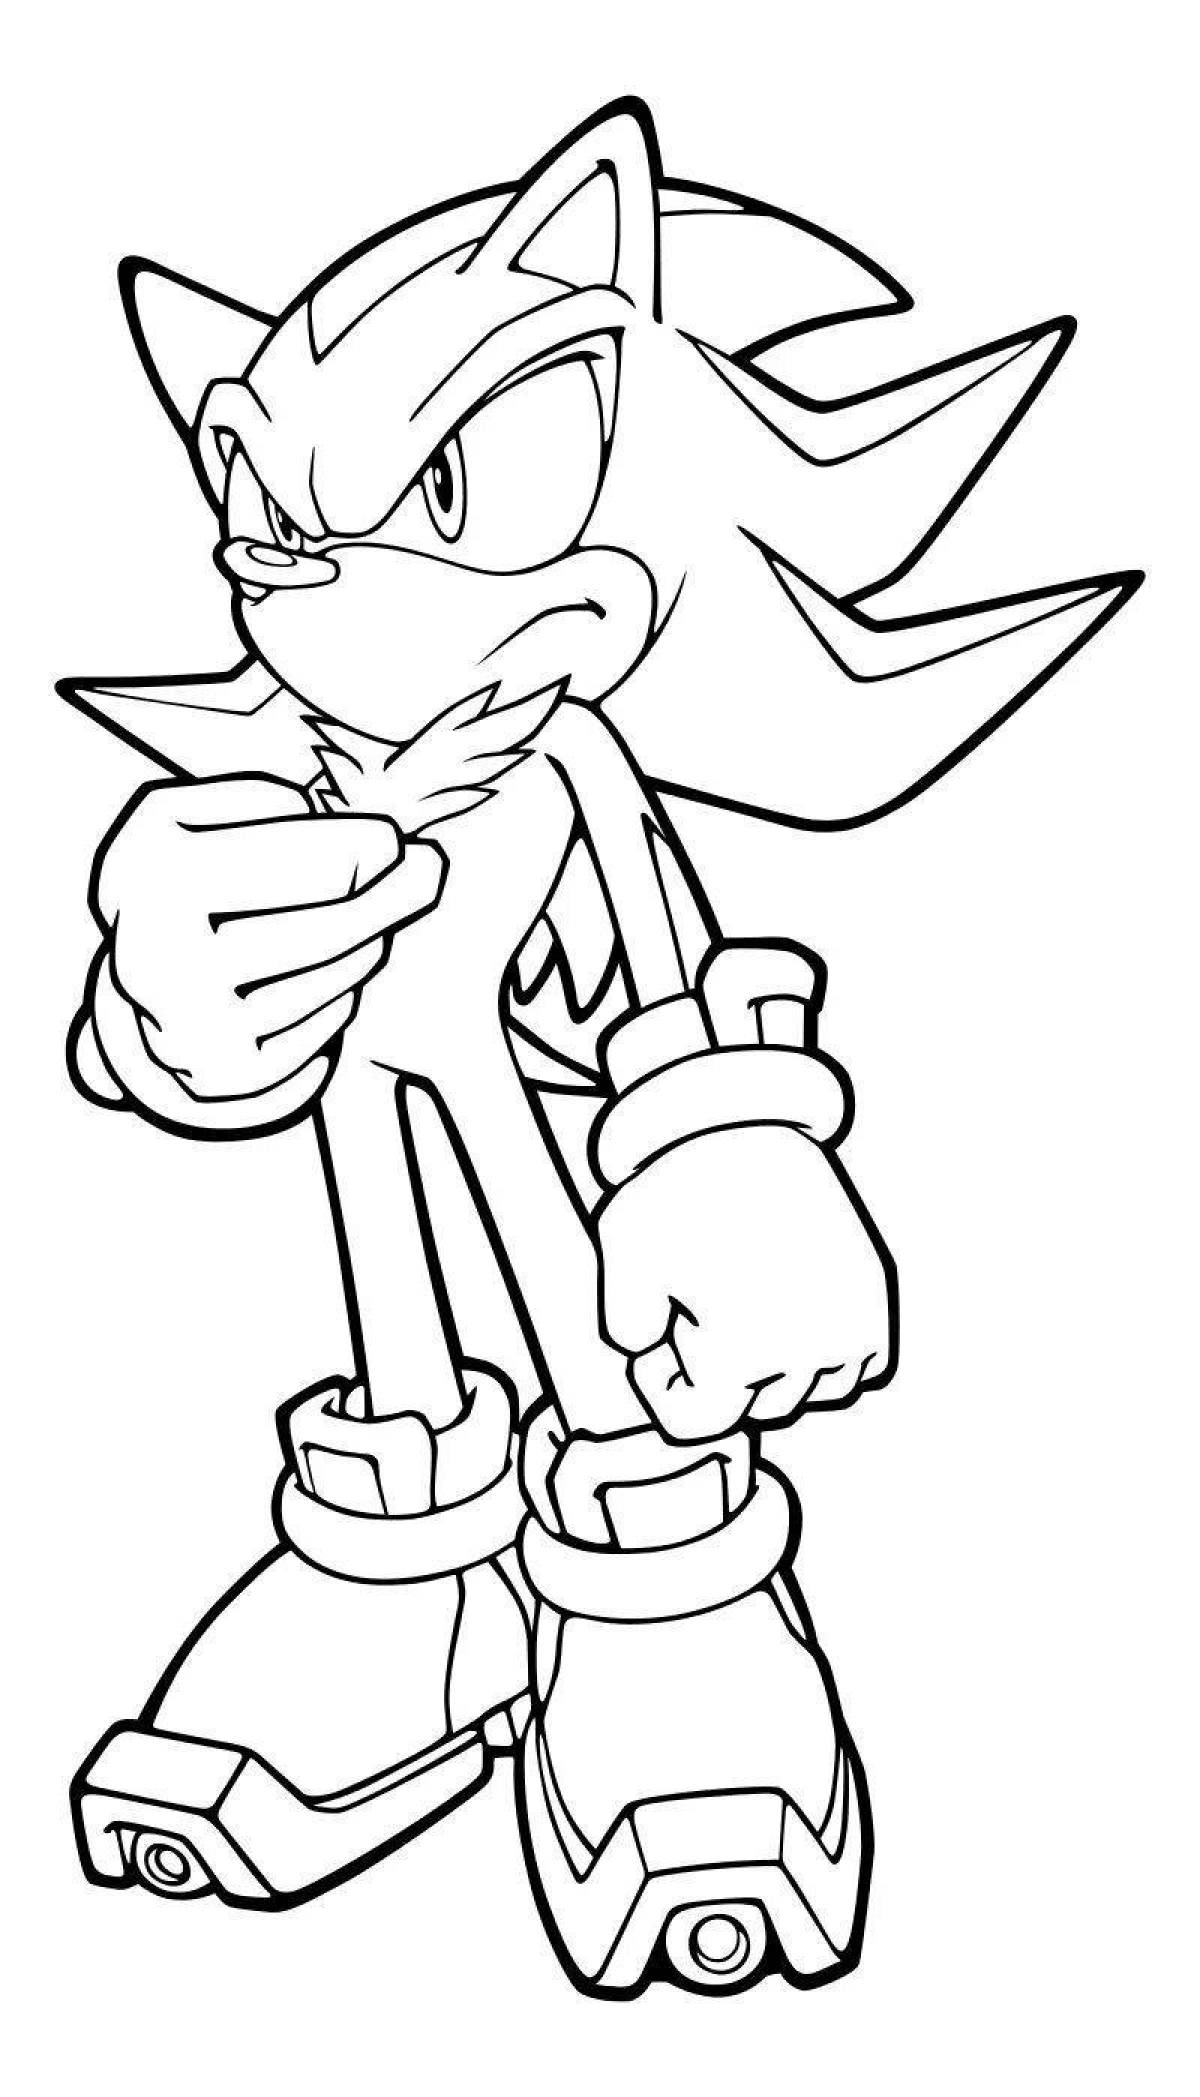 Prominent characters of the sonic coloring page